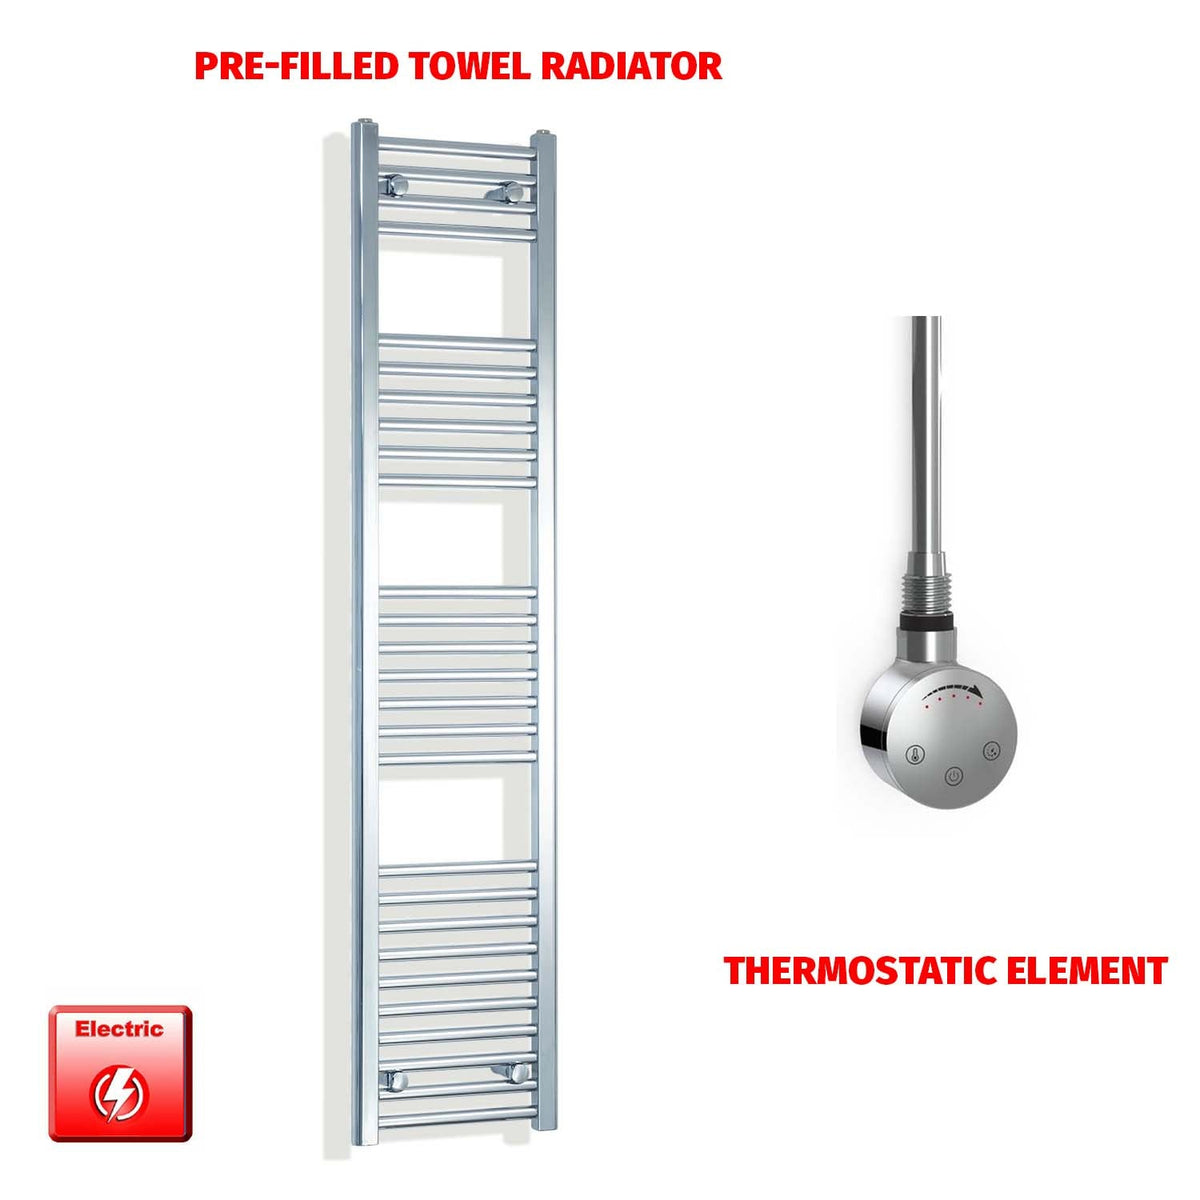 1600 x 350 Pre-Filled Electric Heated Towel Radiator Straight Chrome SMR Thermostatic element no timer